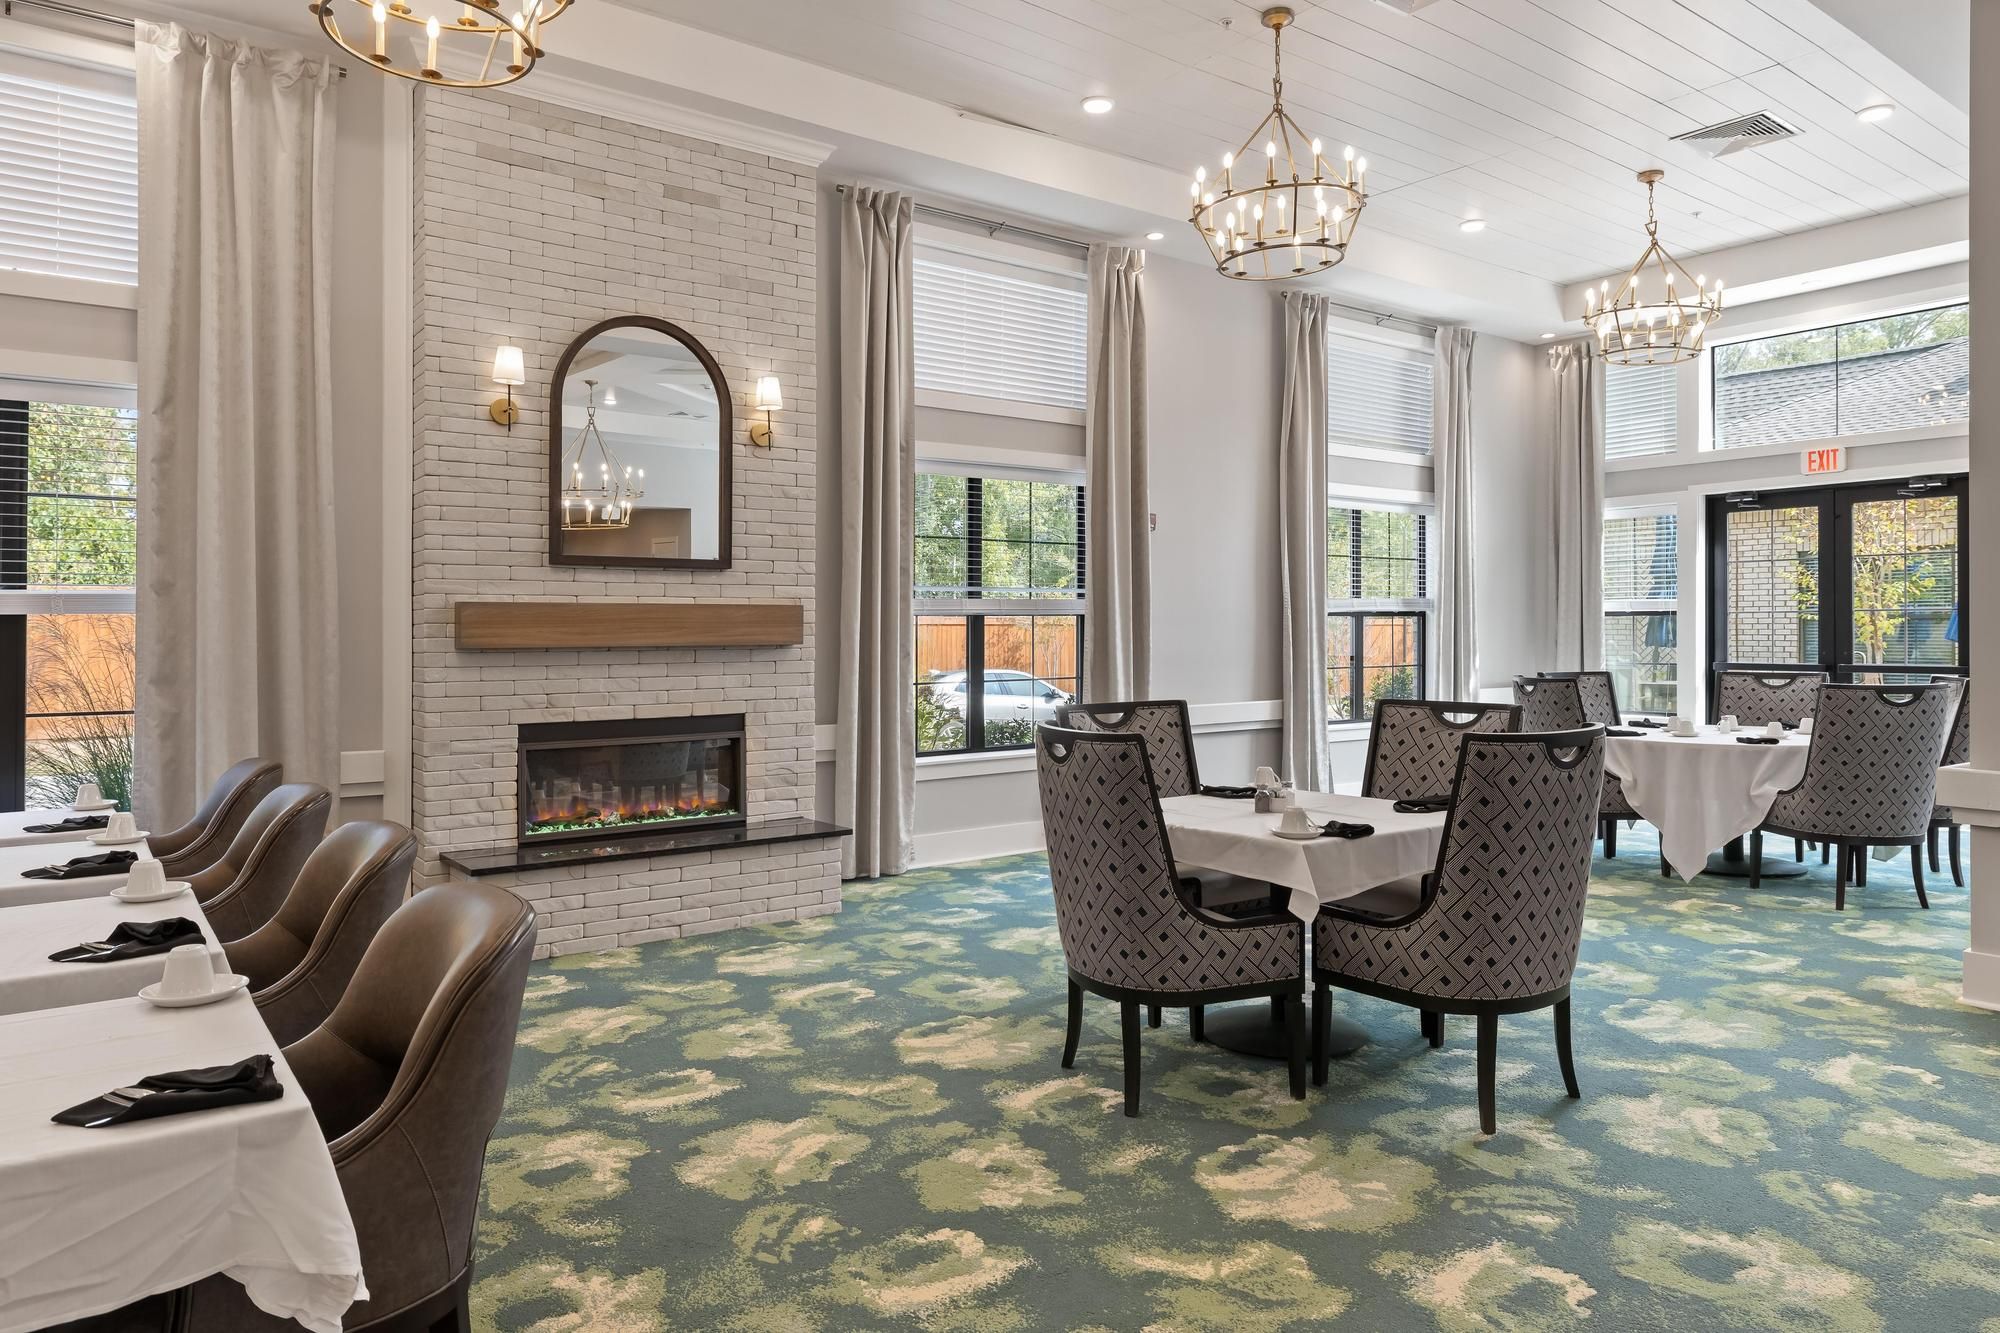 The Preserve at Meridian dining area for senior residents with tables and chairs and chandeliers